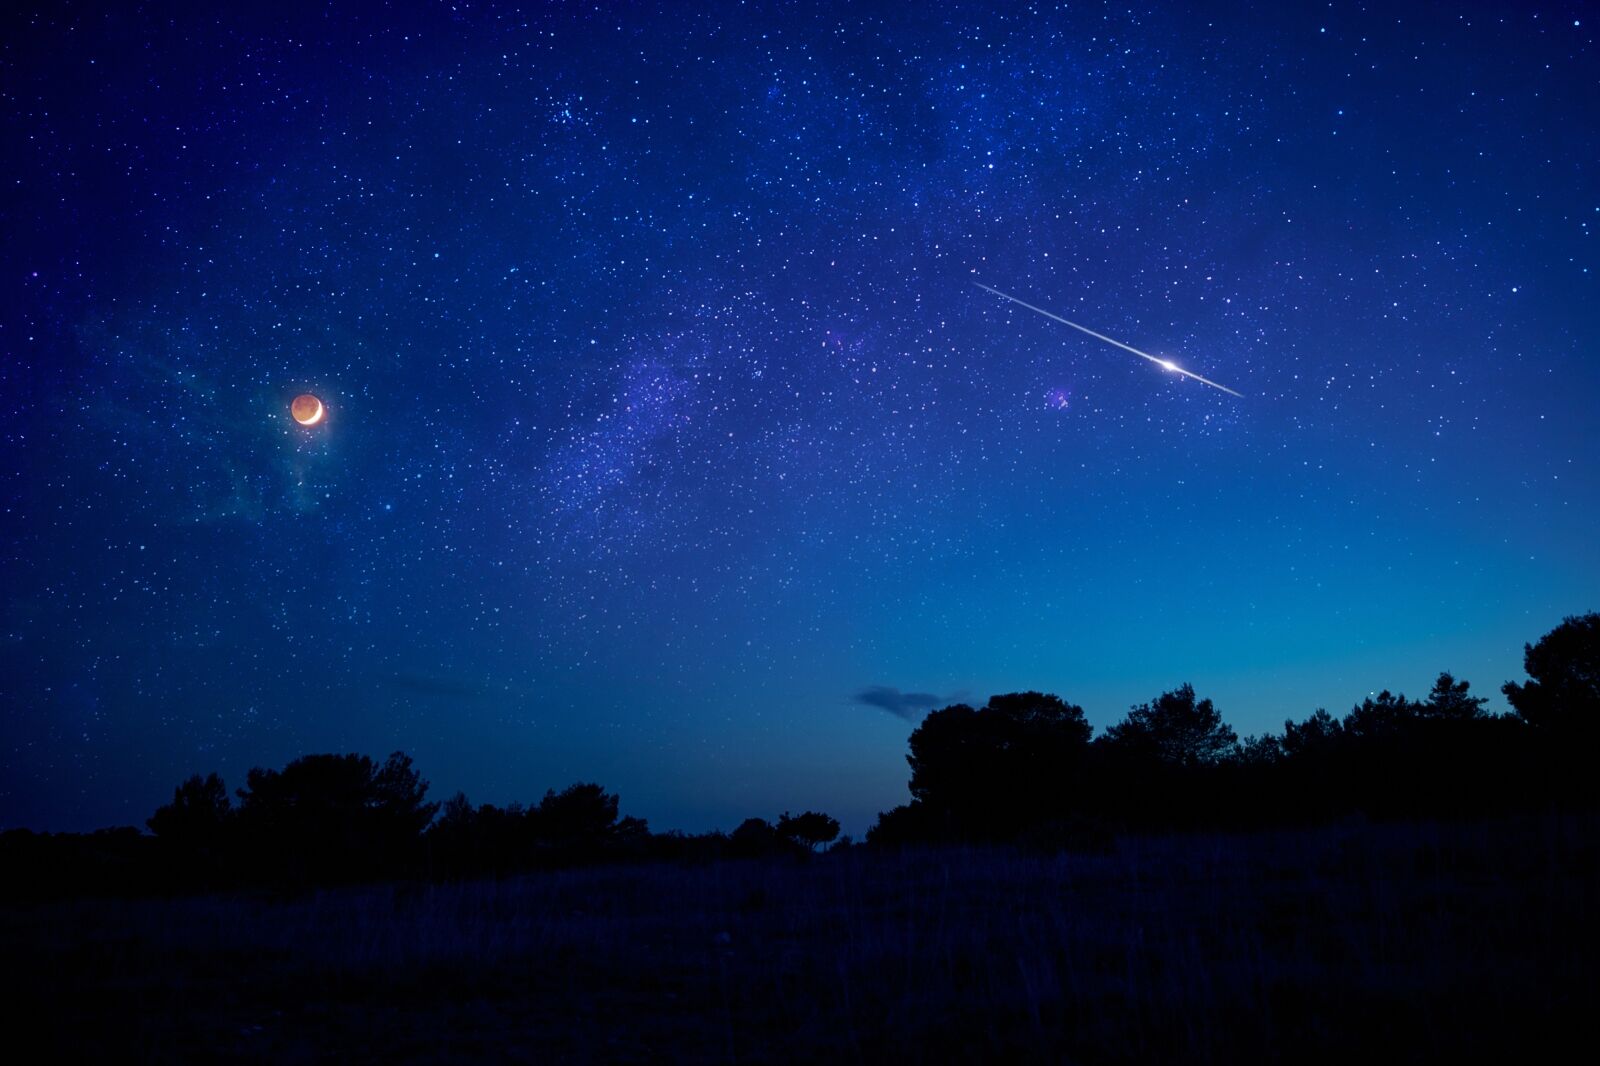 meteor, shooting star, Milky Way and planets